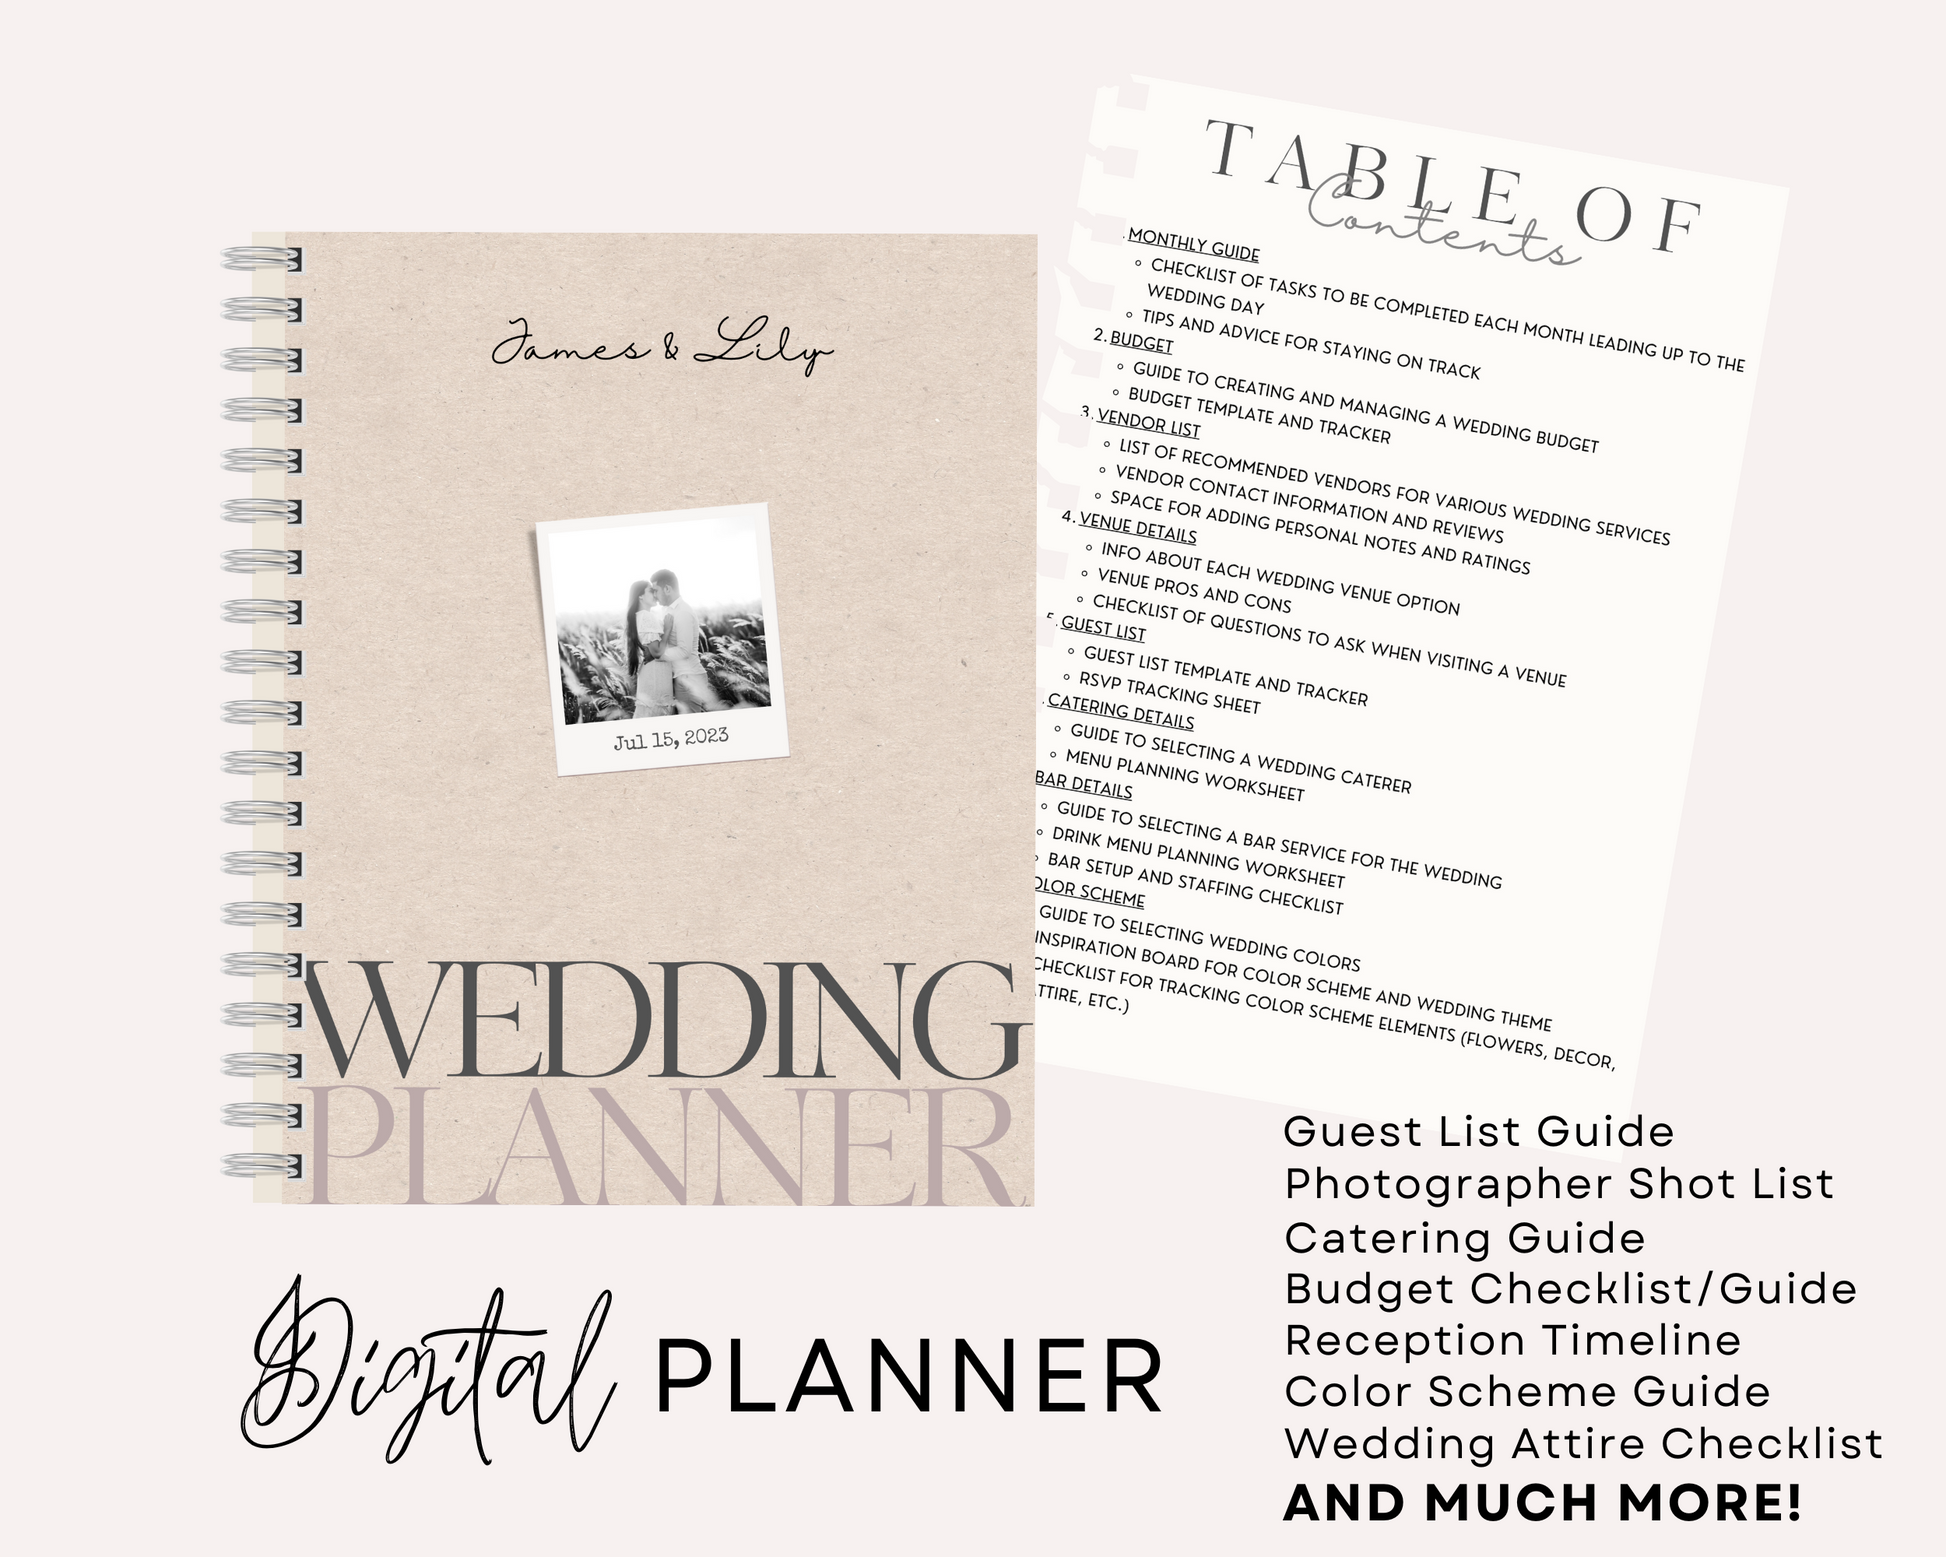 How to Plan a Wedding Step by Step: Tips & Budget Advice